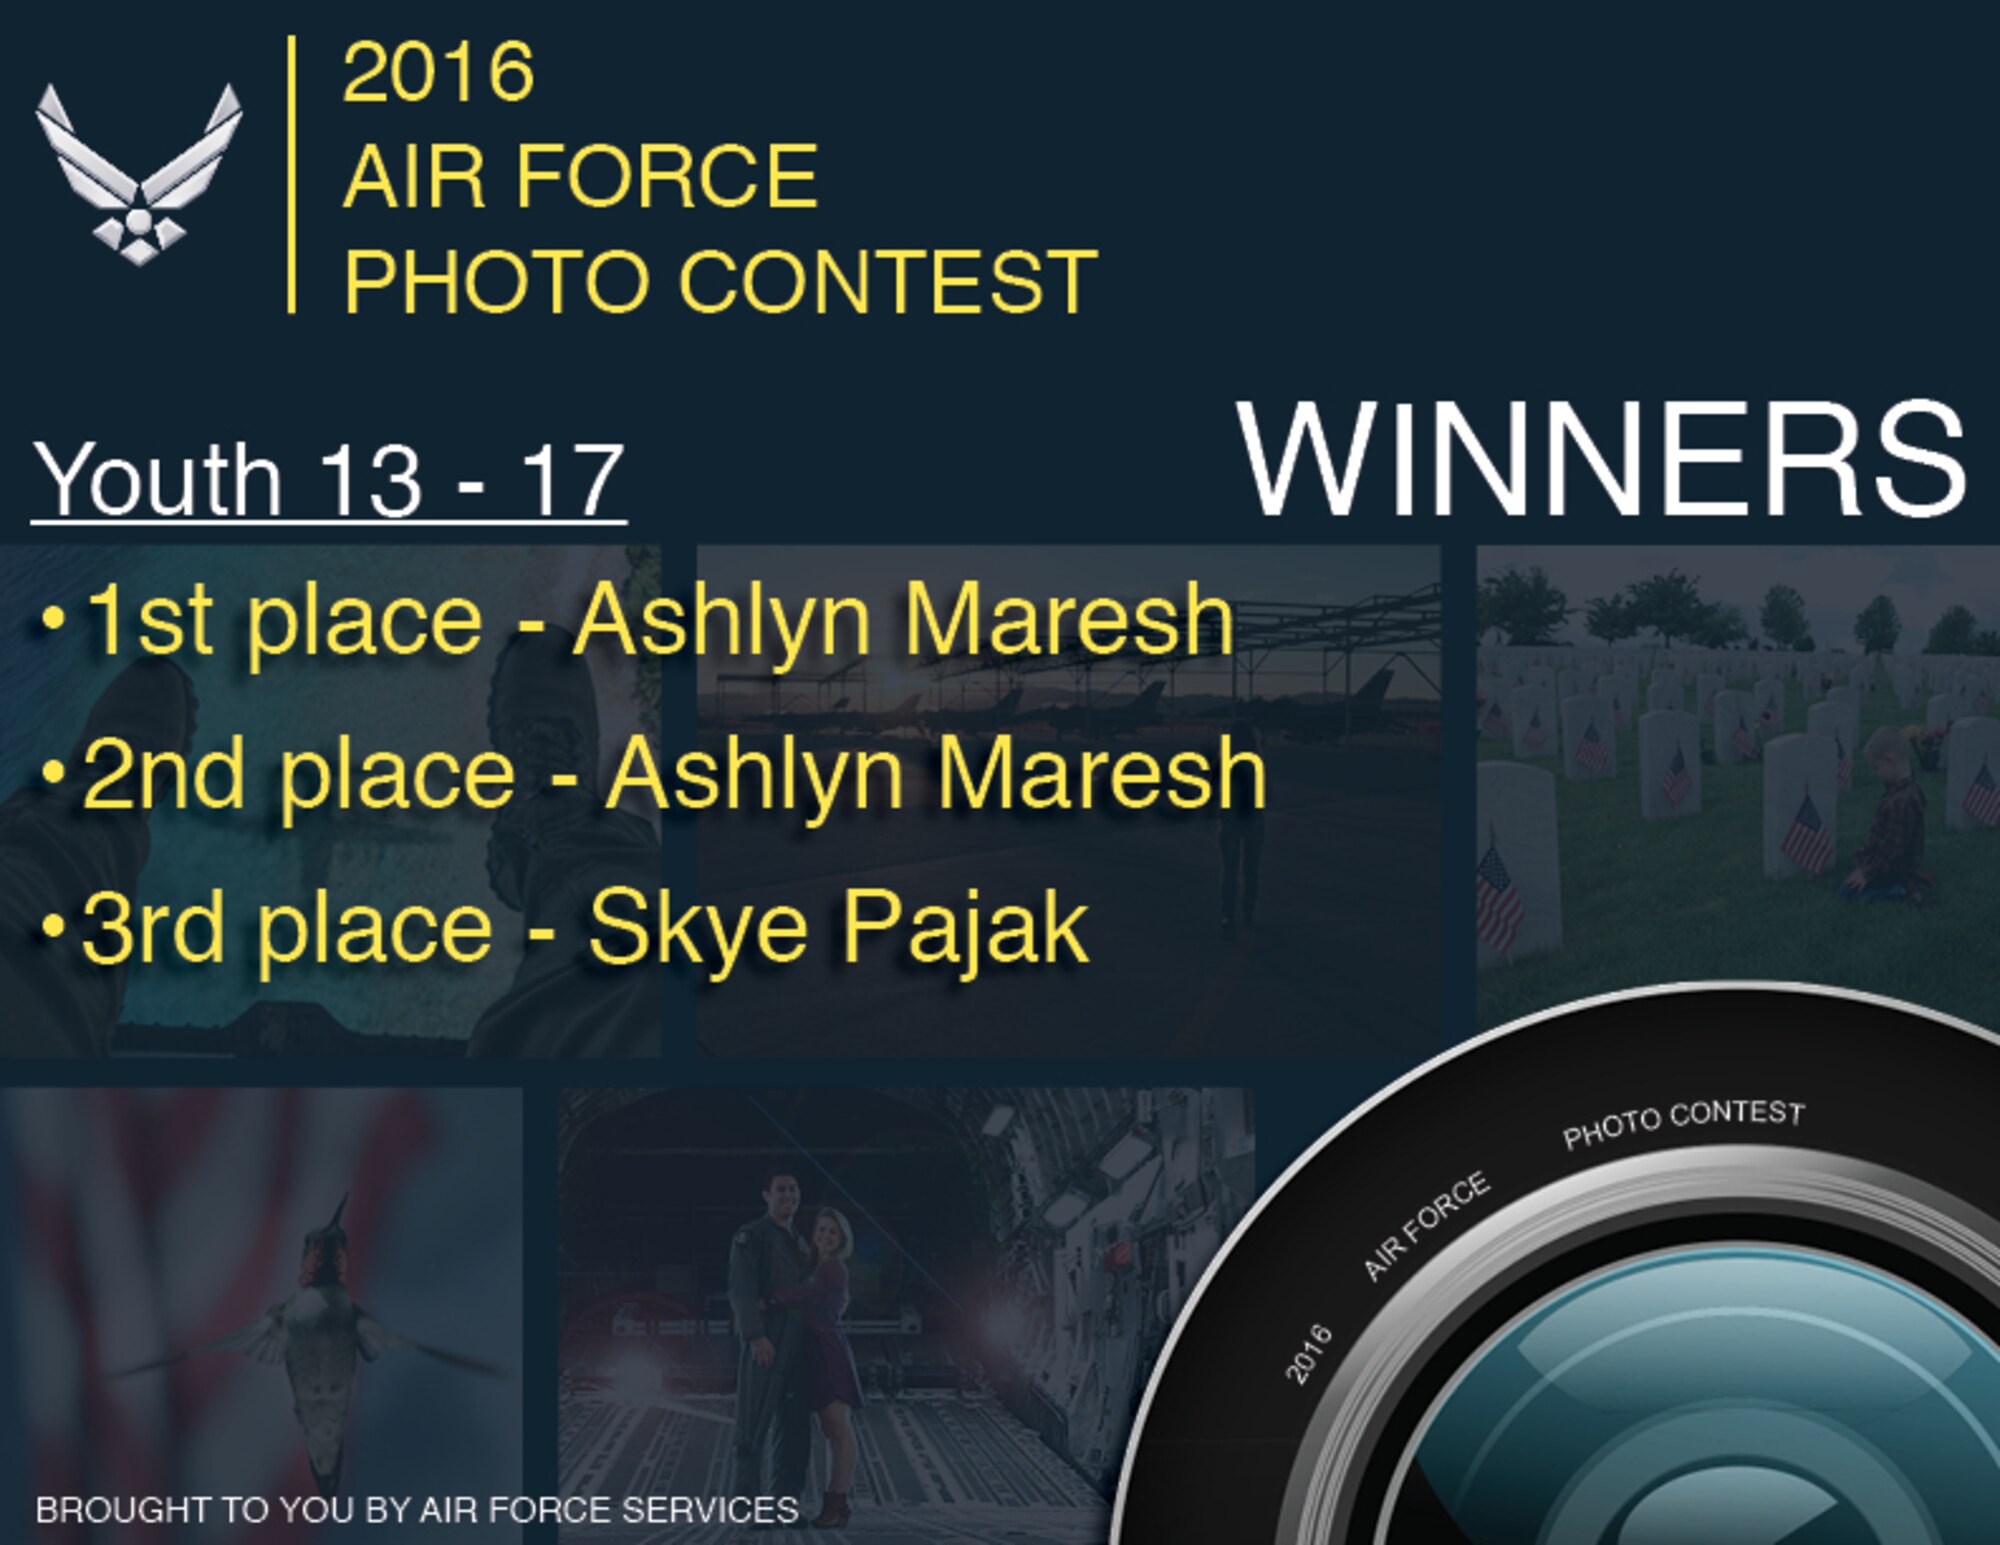 2016 Air Force Photo Contest winners youth 13-17